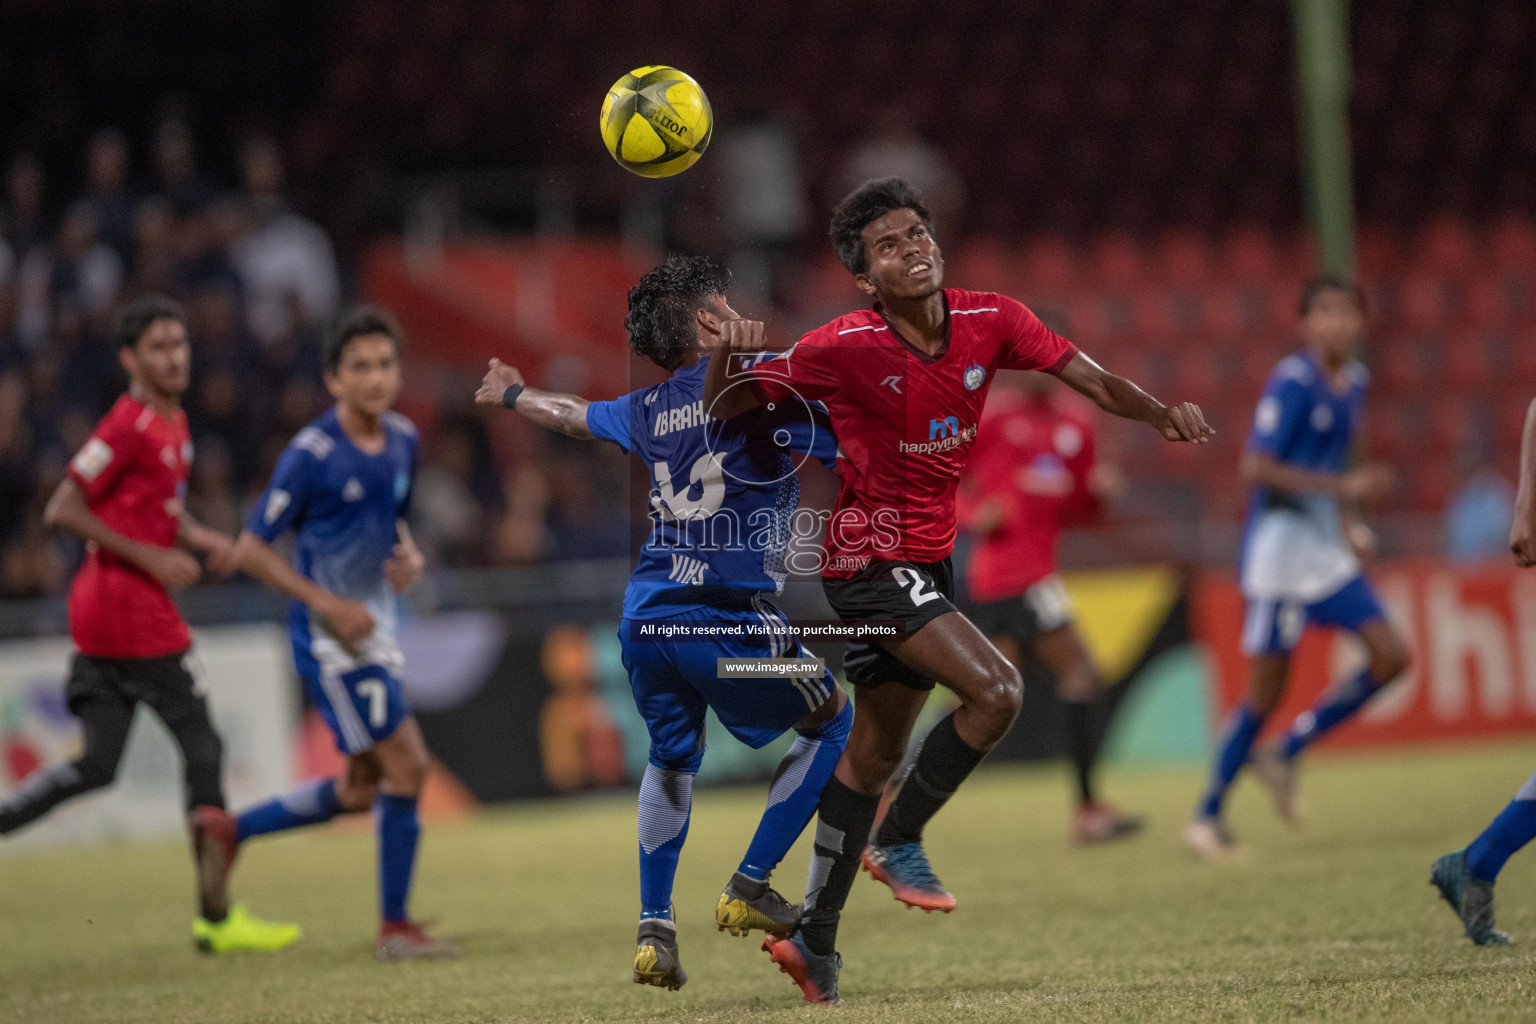 Villa International High School and Center for Higher Secondary Education in the finals of MAMEN Inter School Football Tournament 2019 (U18) in Male, Maldives on 8th April 2019